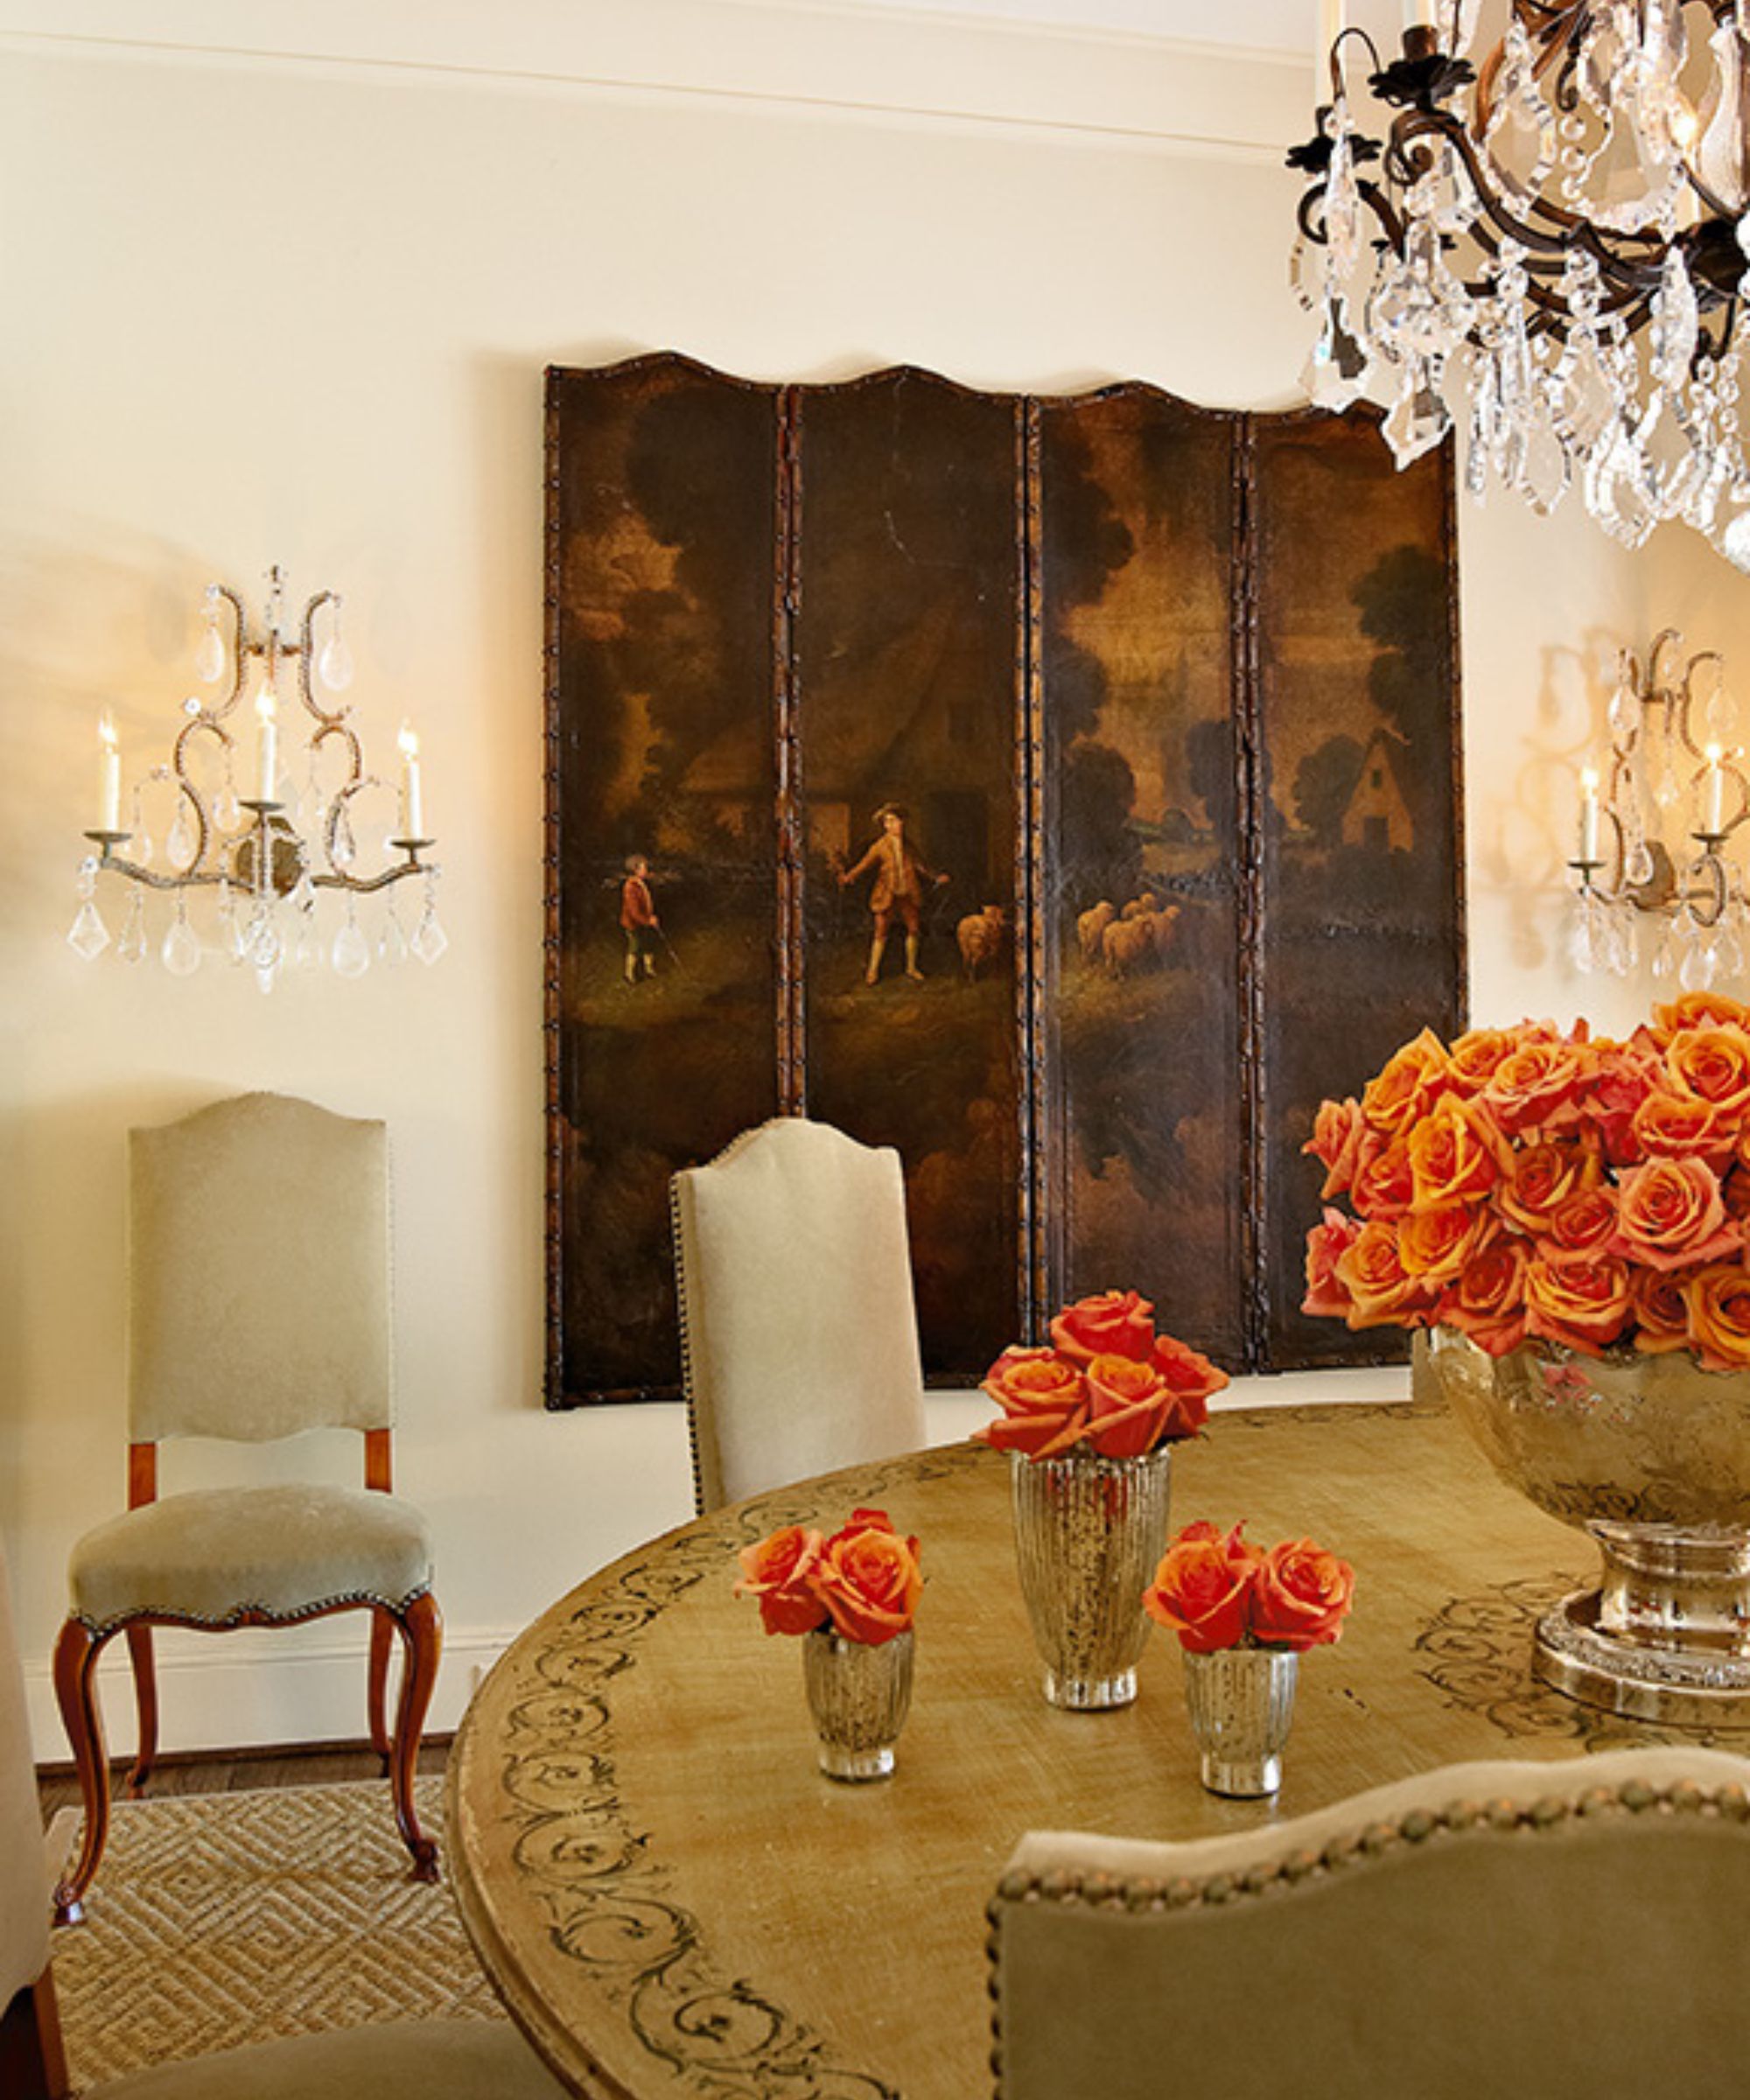 handpainted dining room table with antique wall decor and a large chandelier. the table is filled with fresh cut flowers